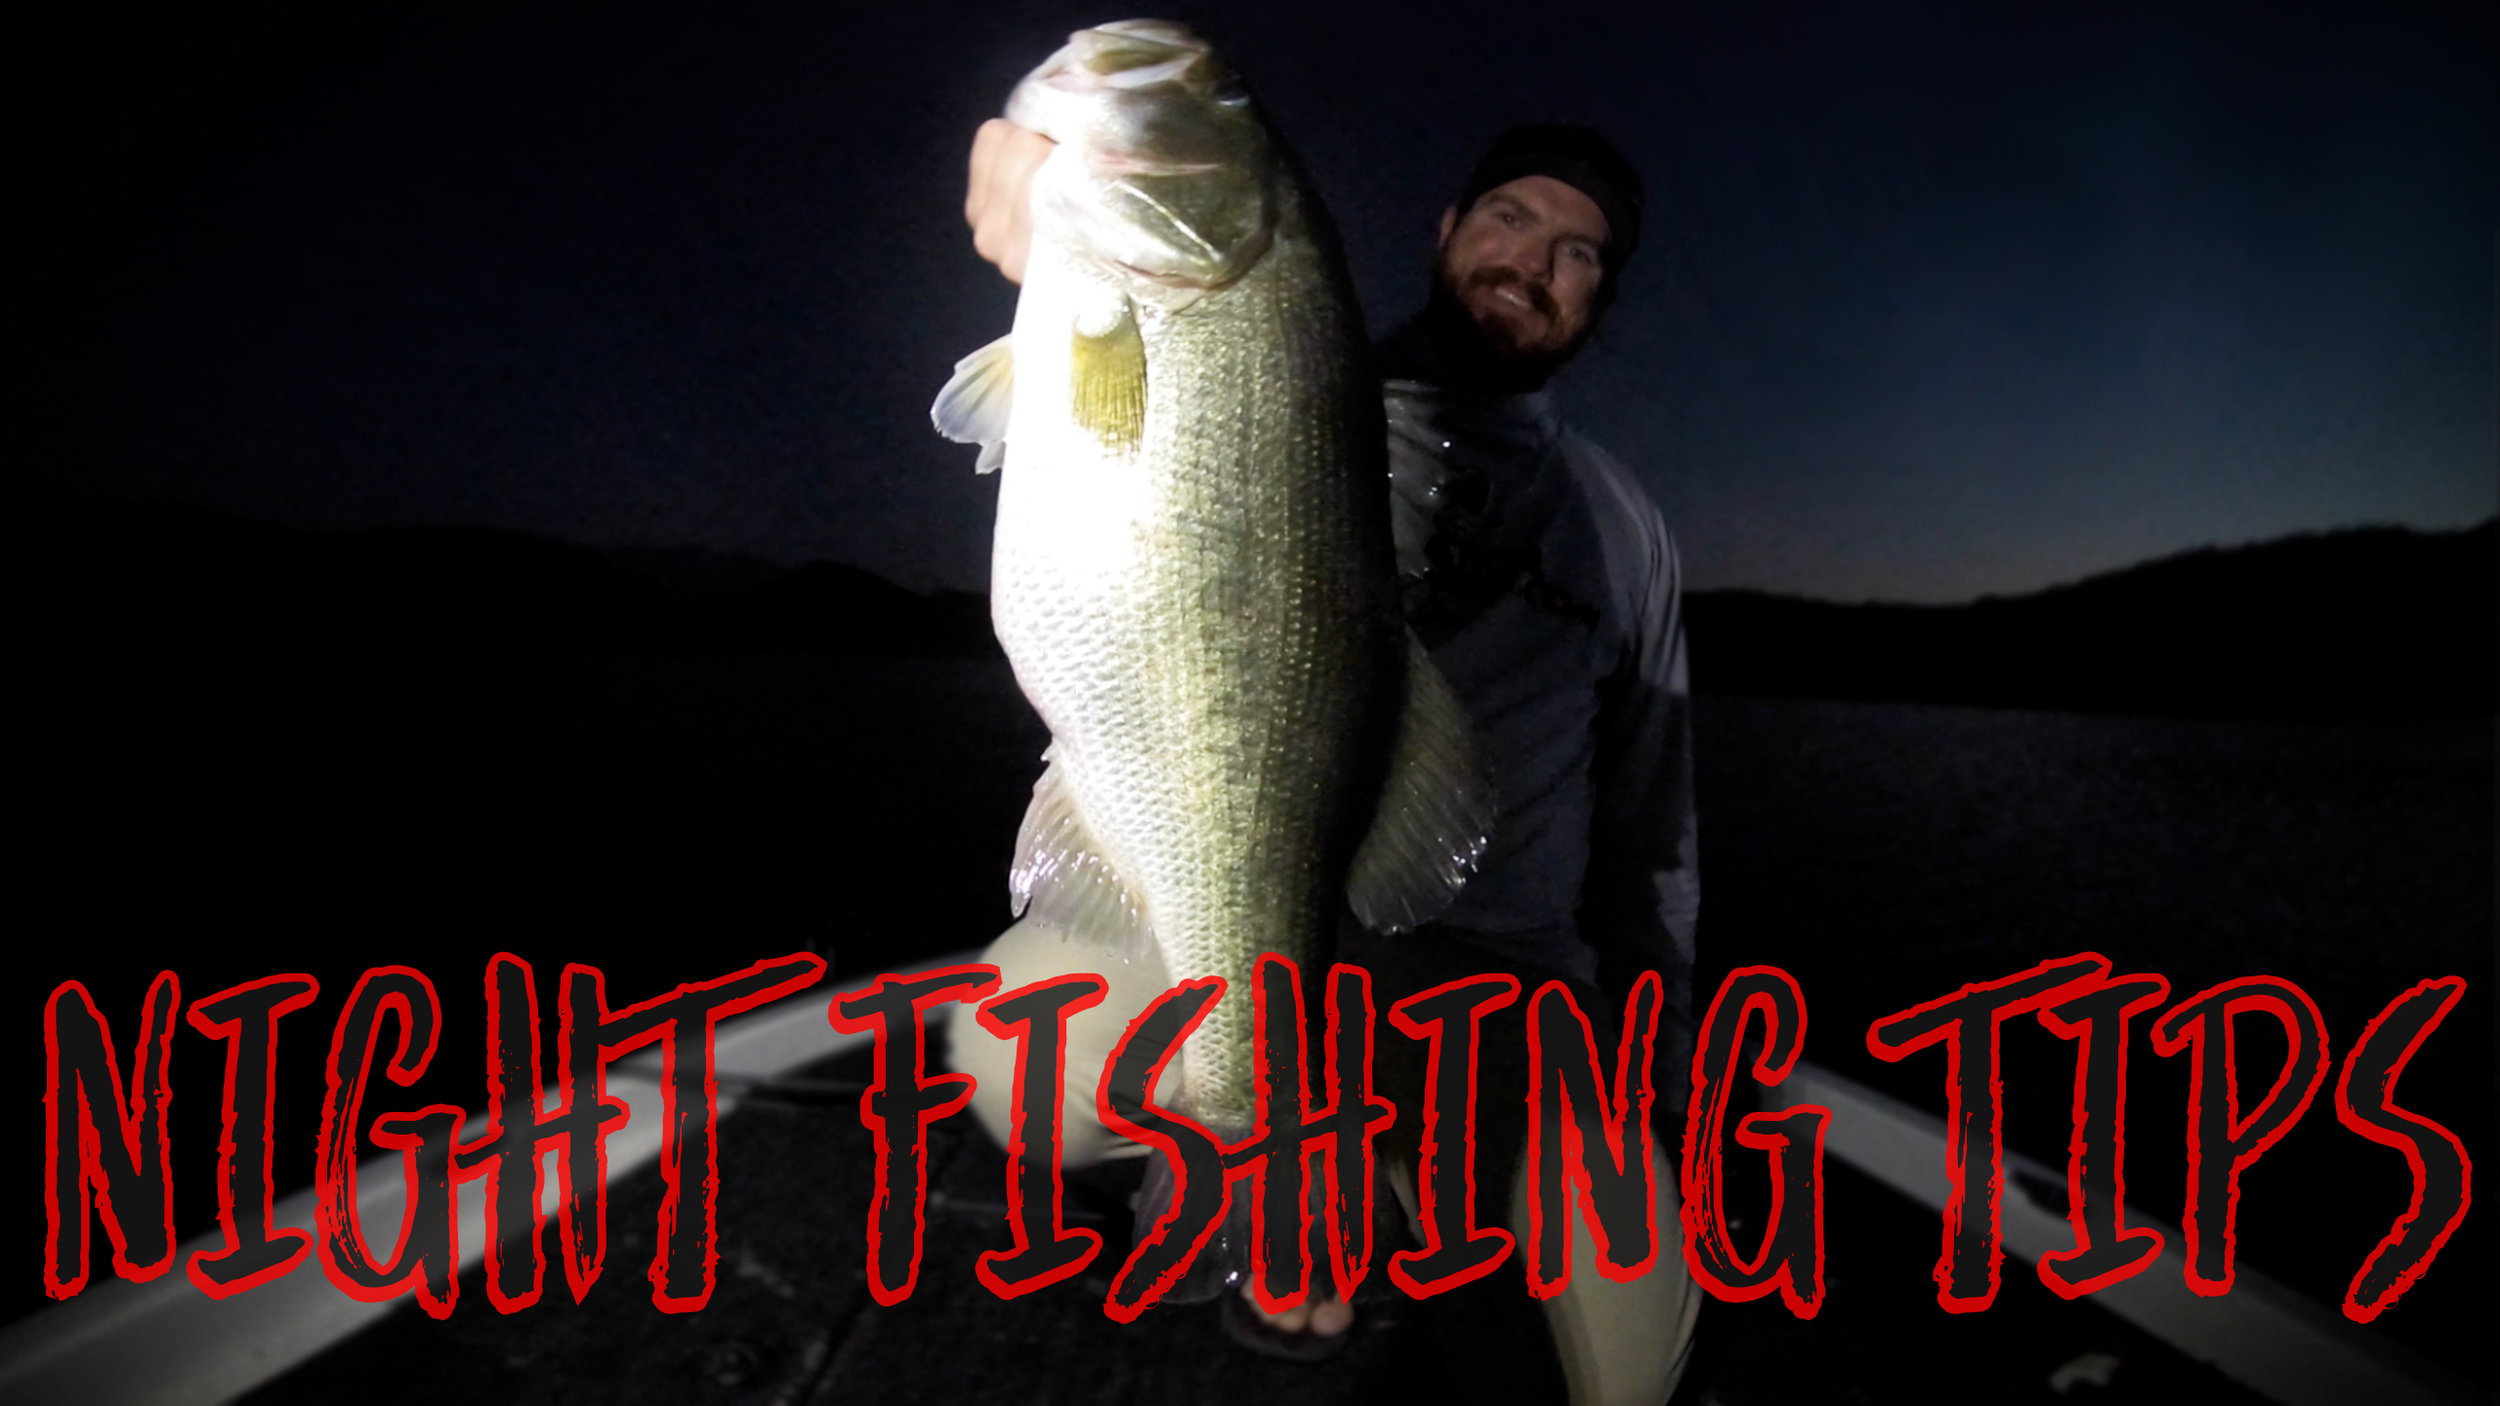 Night Bass Fishing Tips And Strategies For Big Largemouth Bass